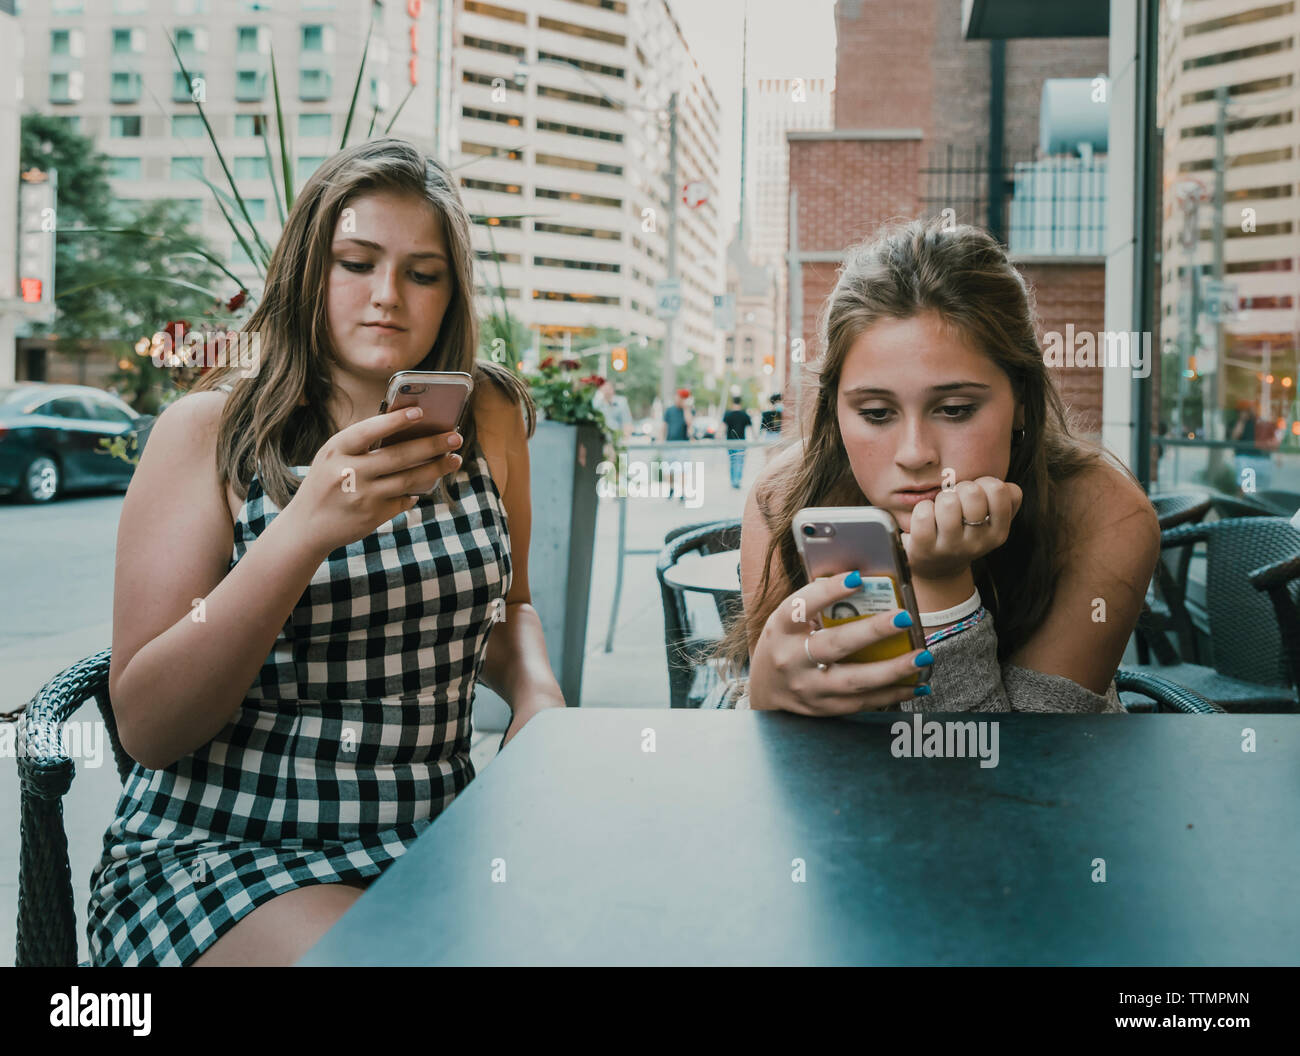 Female friends using smart phones while sitting at sidewalk cafe Stock Photo